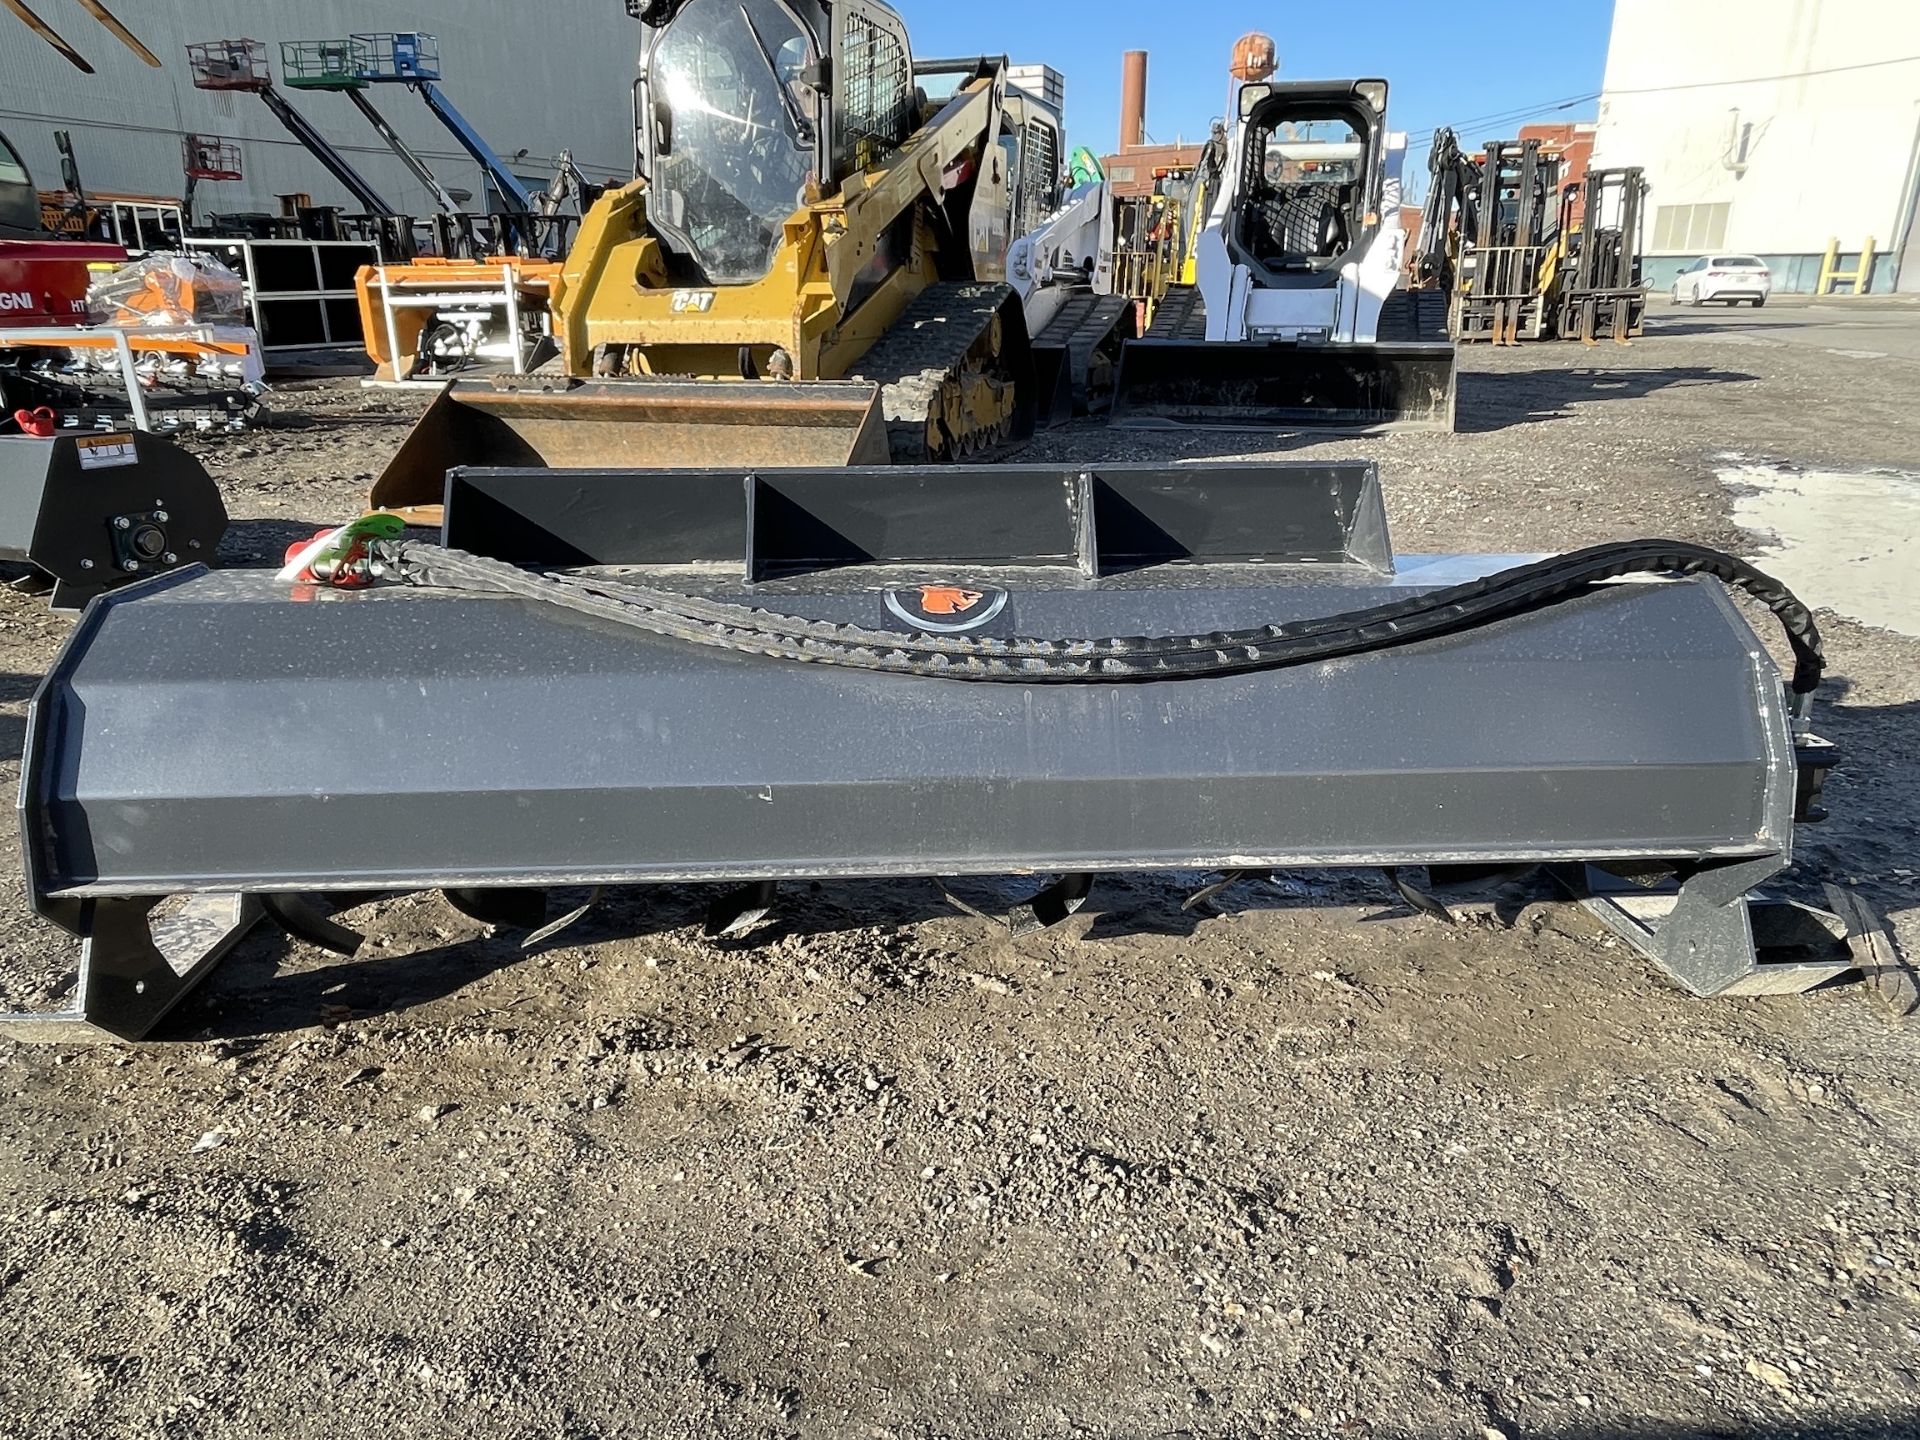 Brand New Wolverine 72" Hydraulic Rotary Tiller Attachment (C416E) - Image 6 of 7